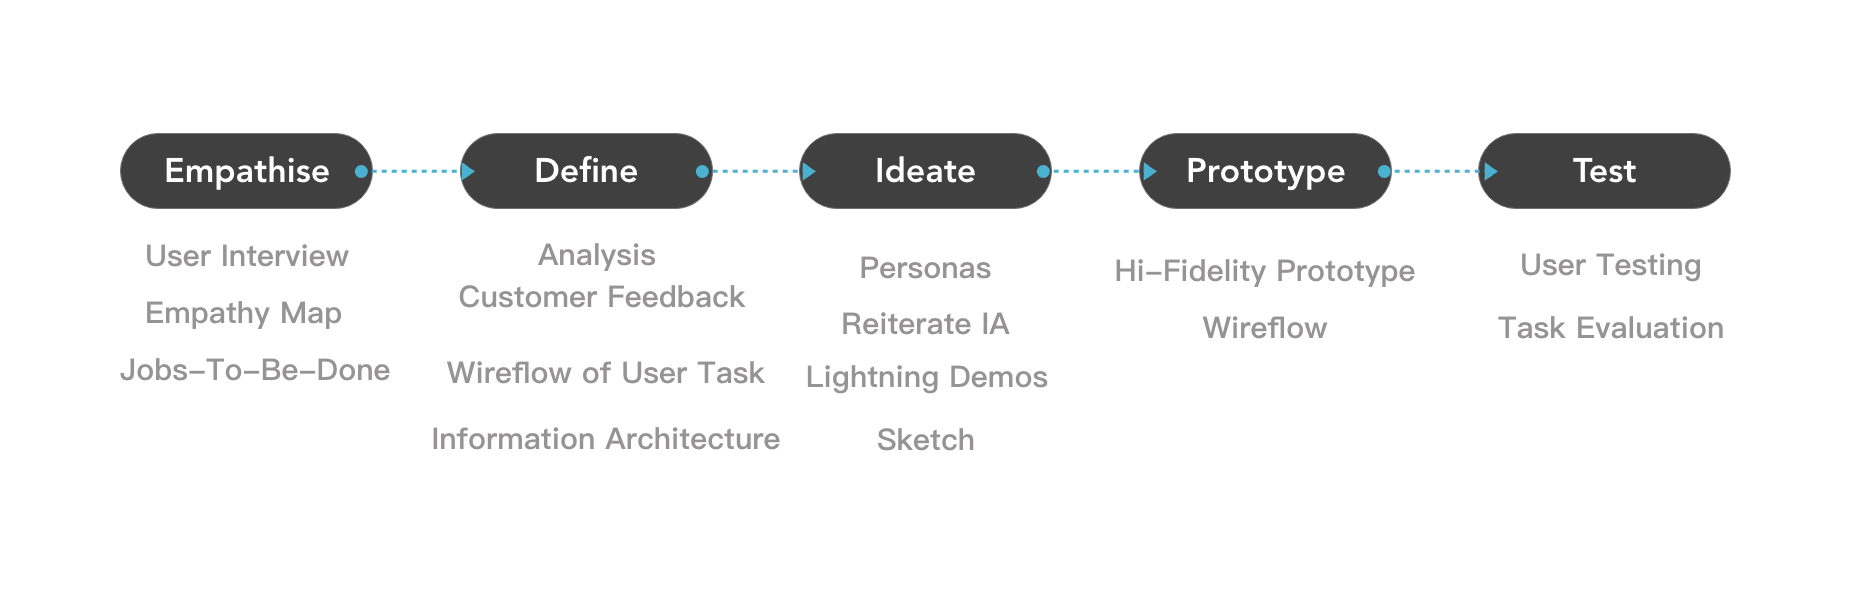 The design proccess with five stage.Empathise,Define,Ideate,Prototype,and Test